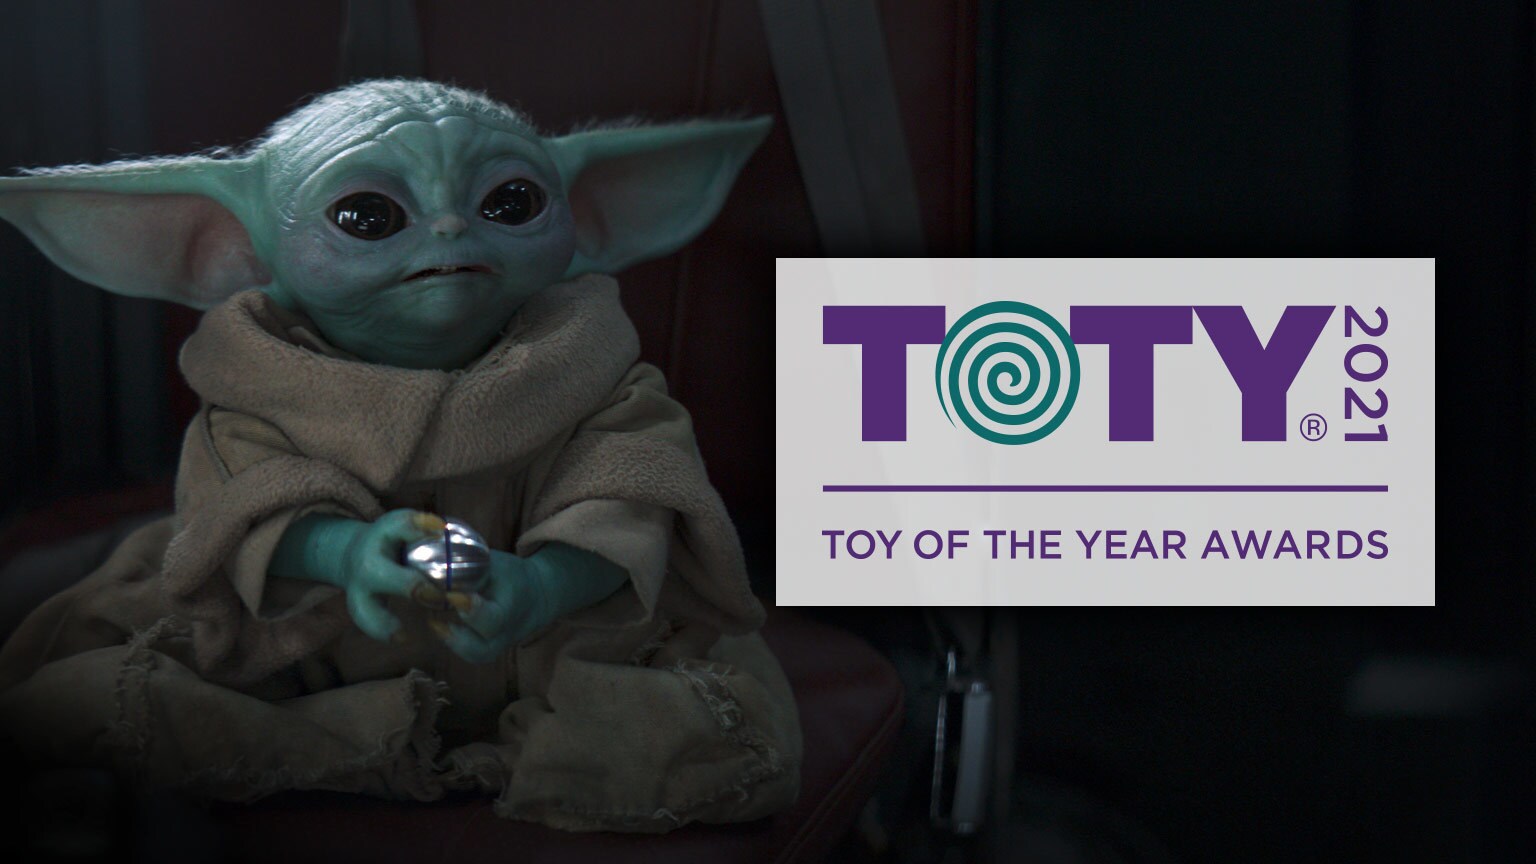 Star Wars Wins 5 Toy of the Year Awards!